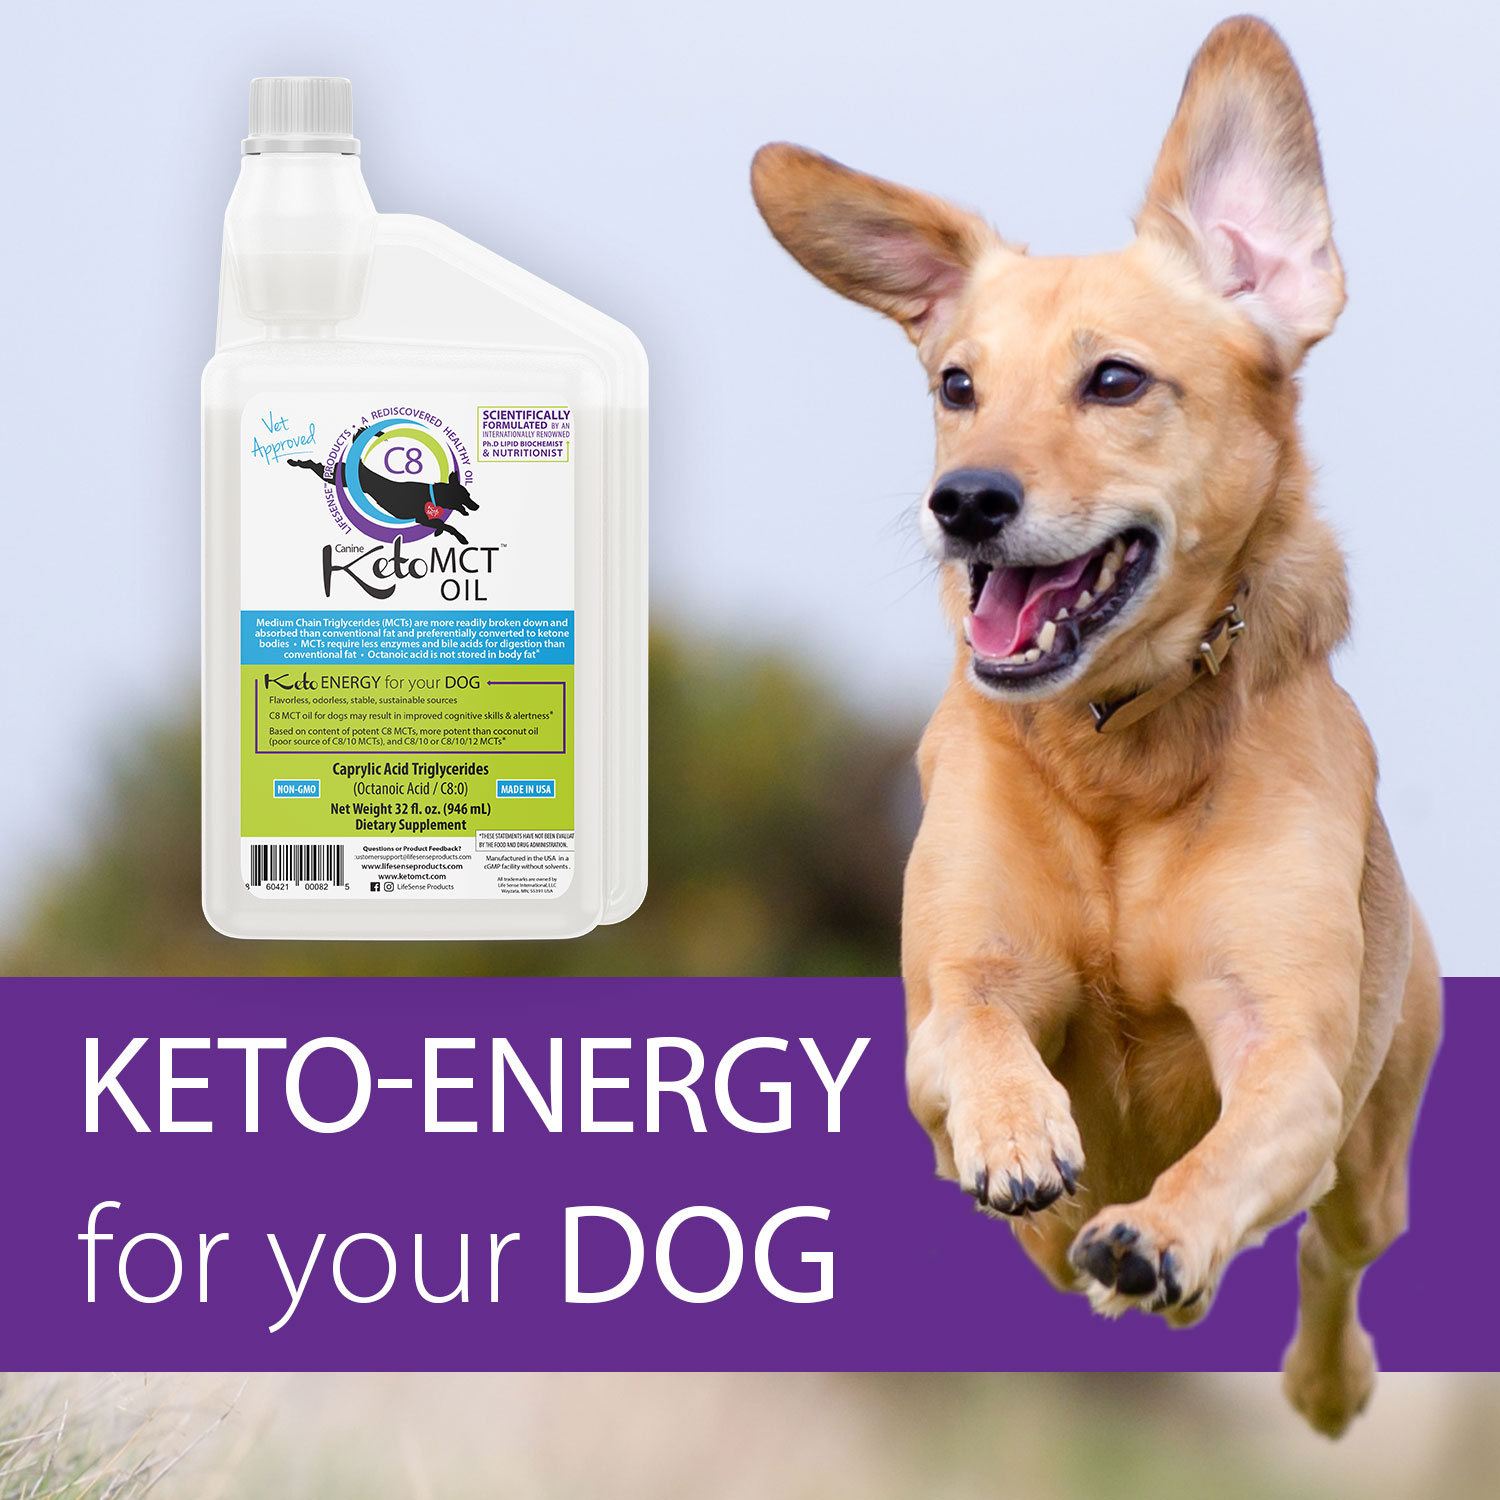 Keto energy for your dog.